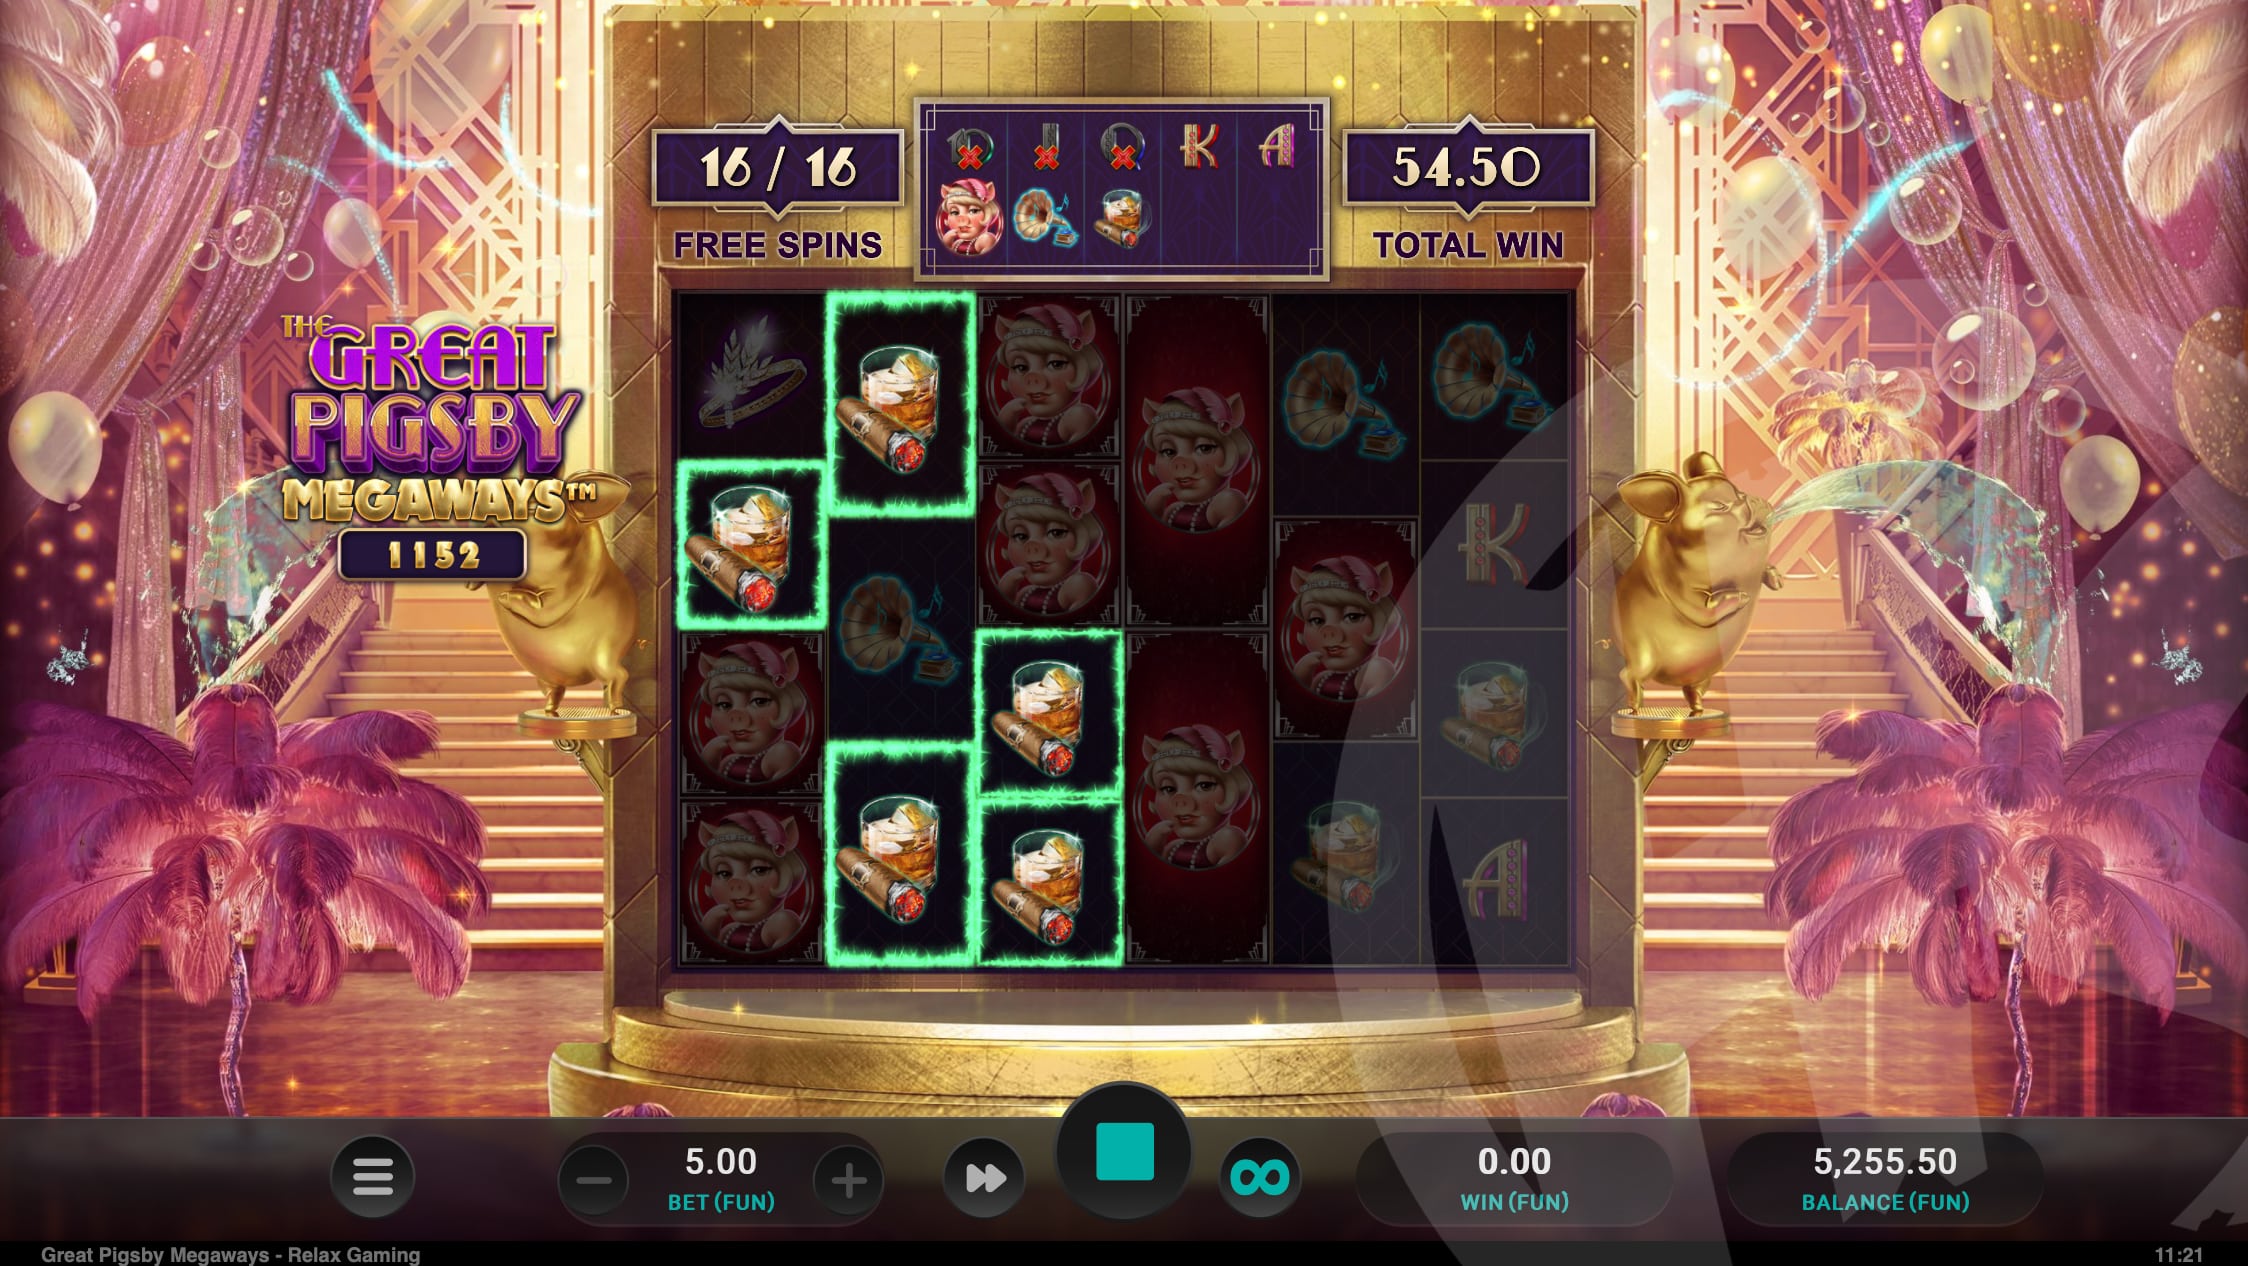 The Great Pigsby Megaways Free Spins